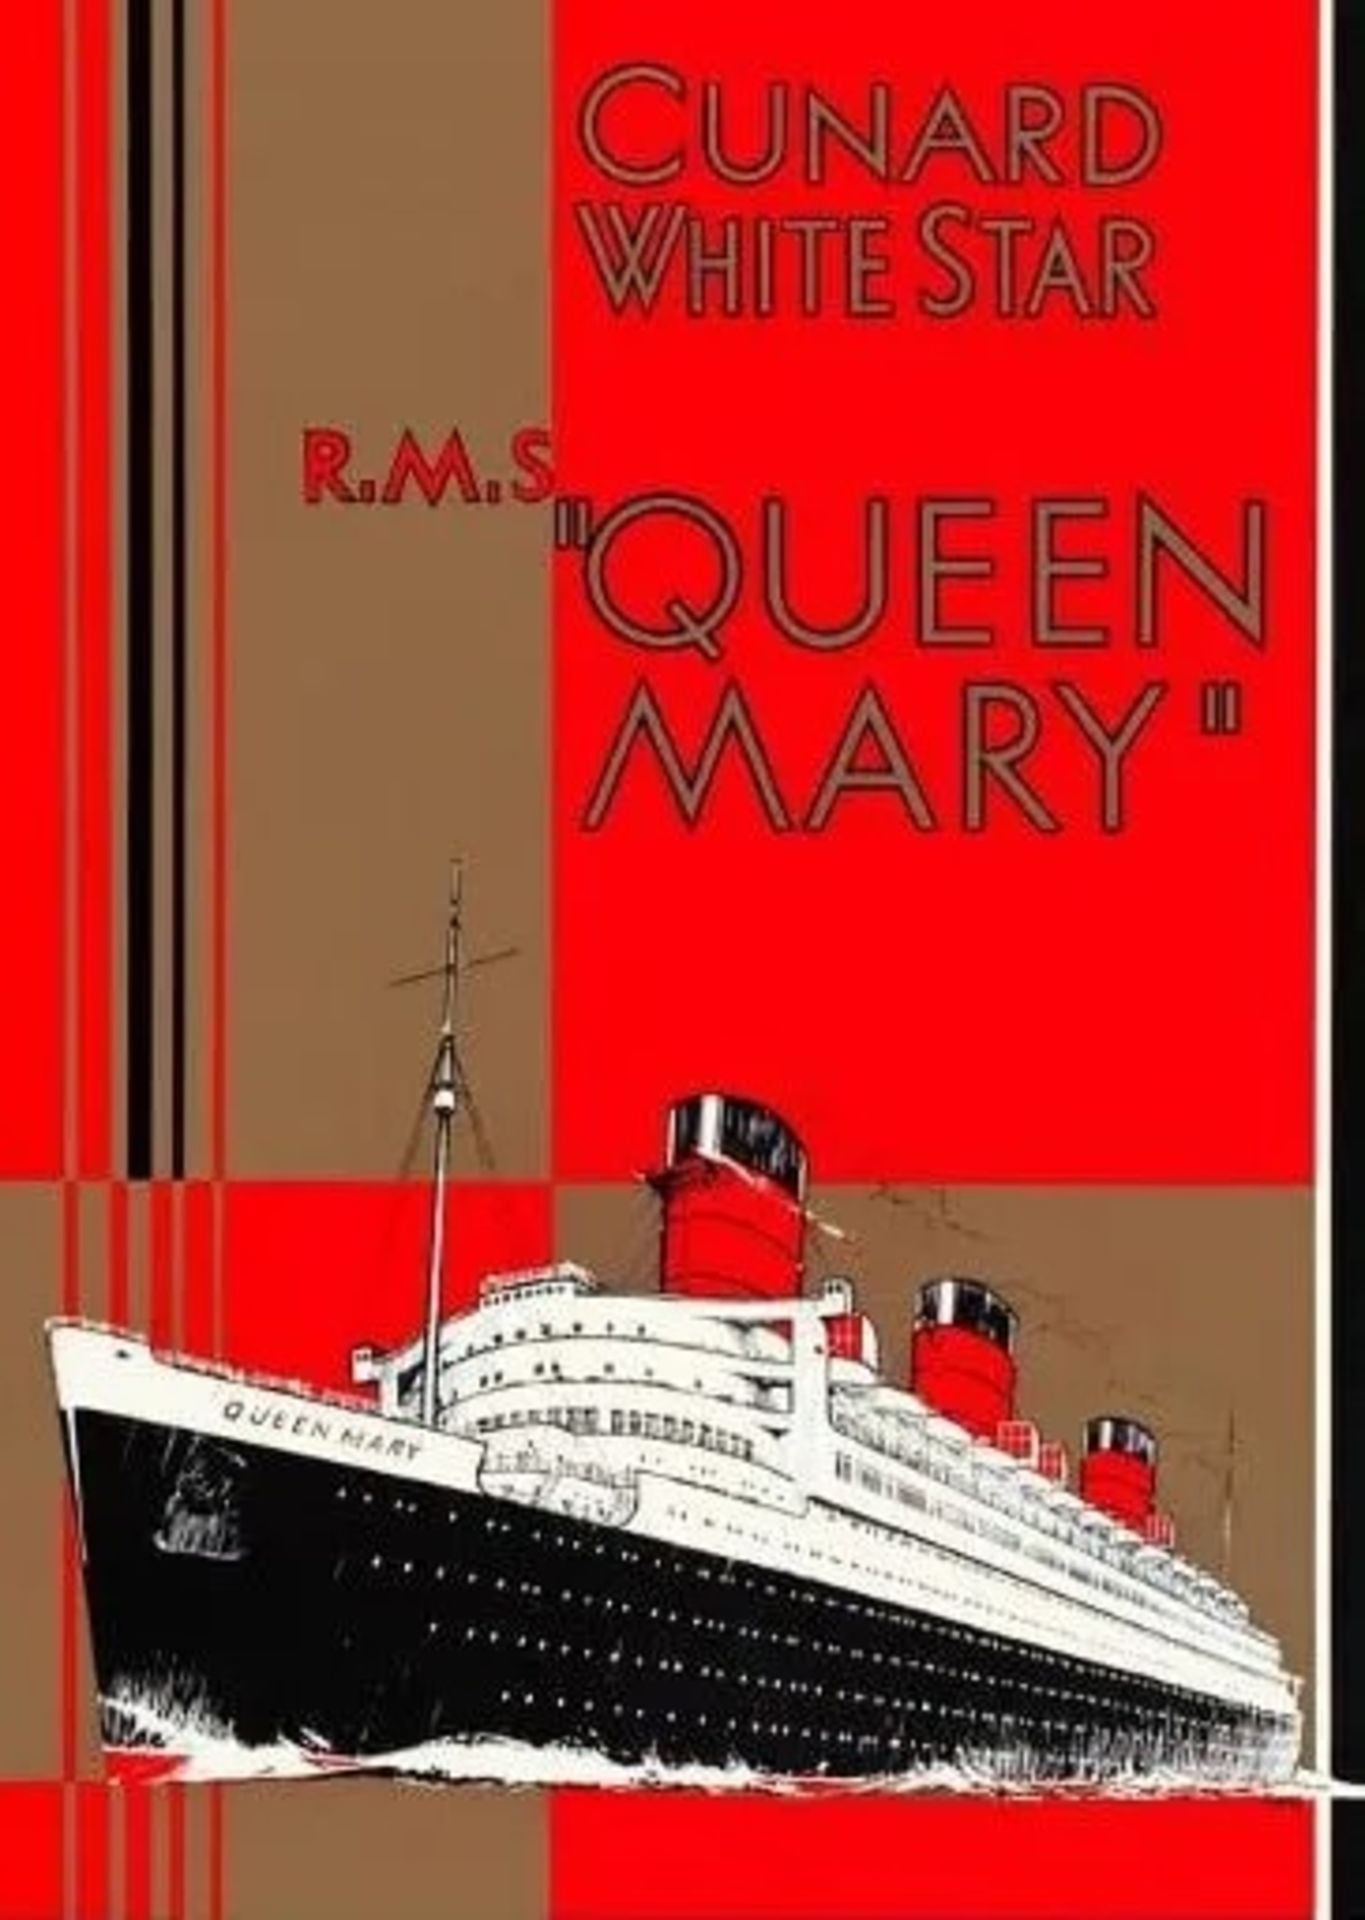 Cunard "White Star, Queen Mary" Travel Poster